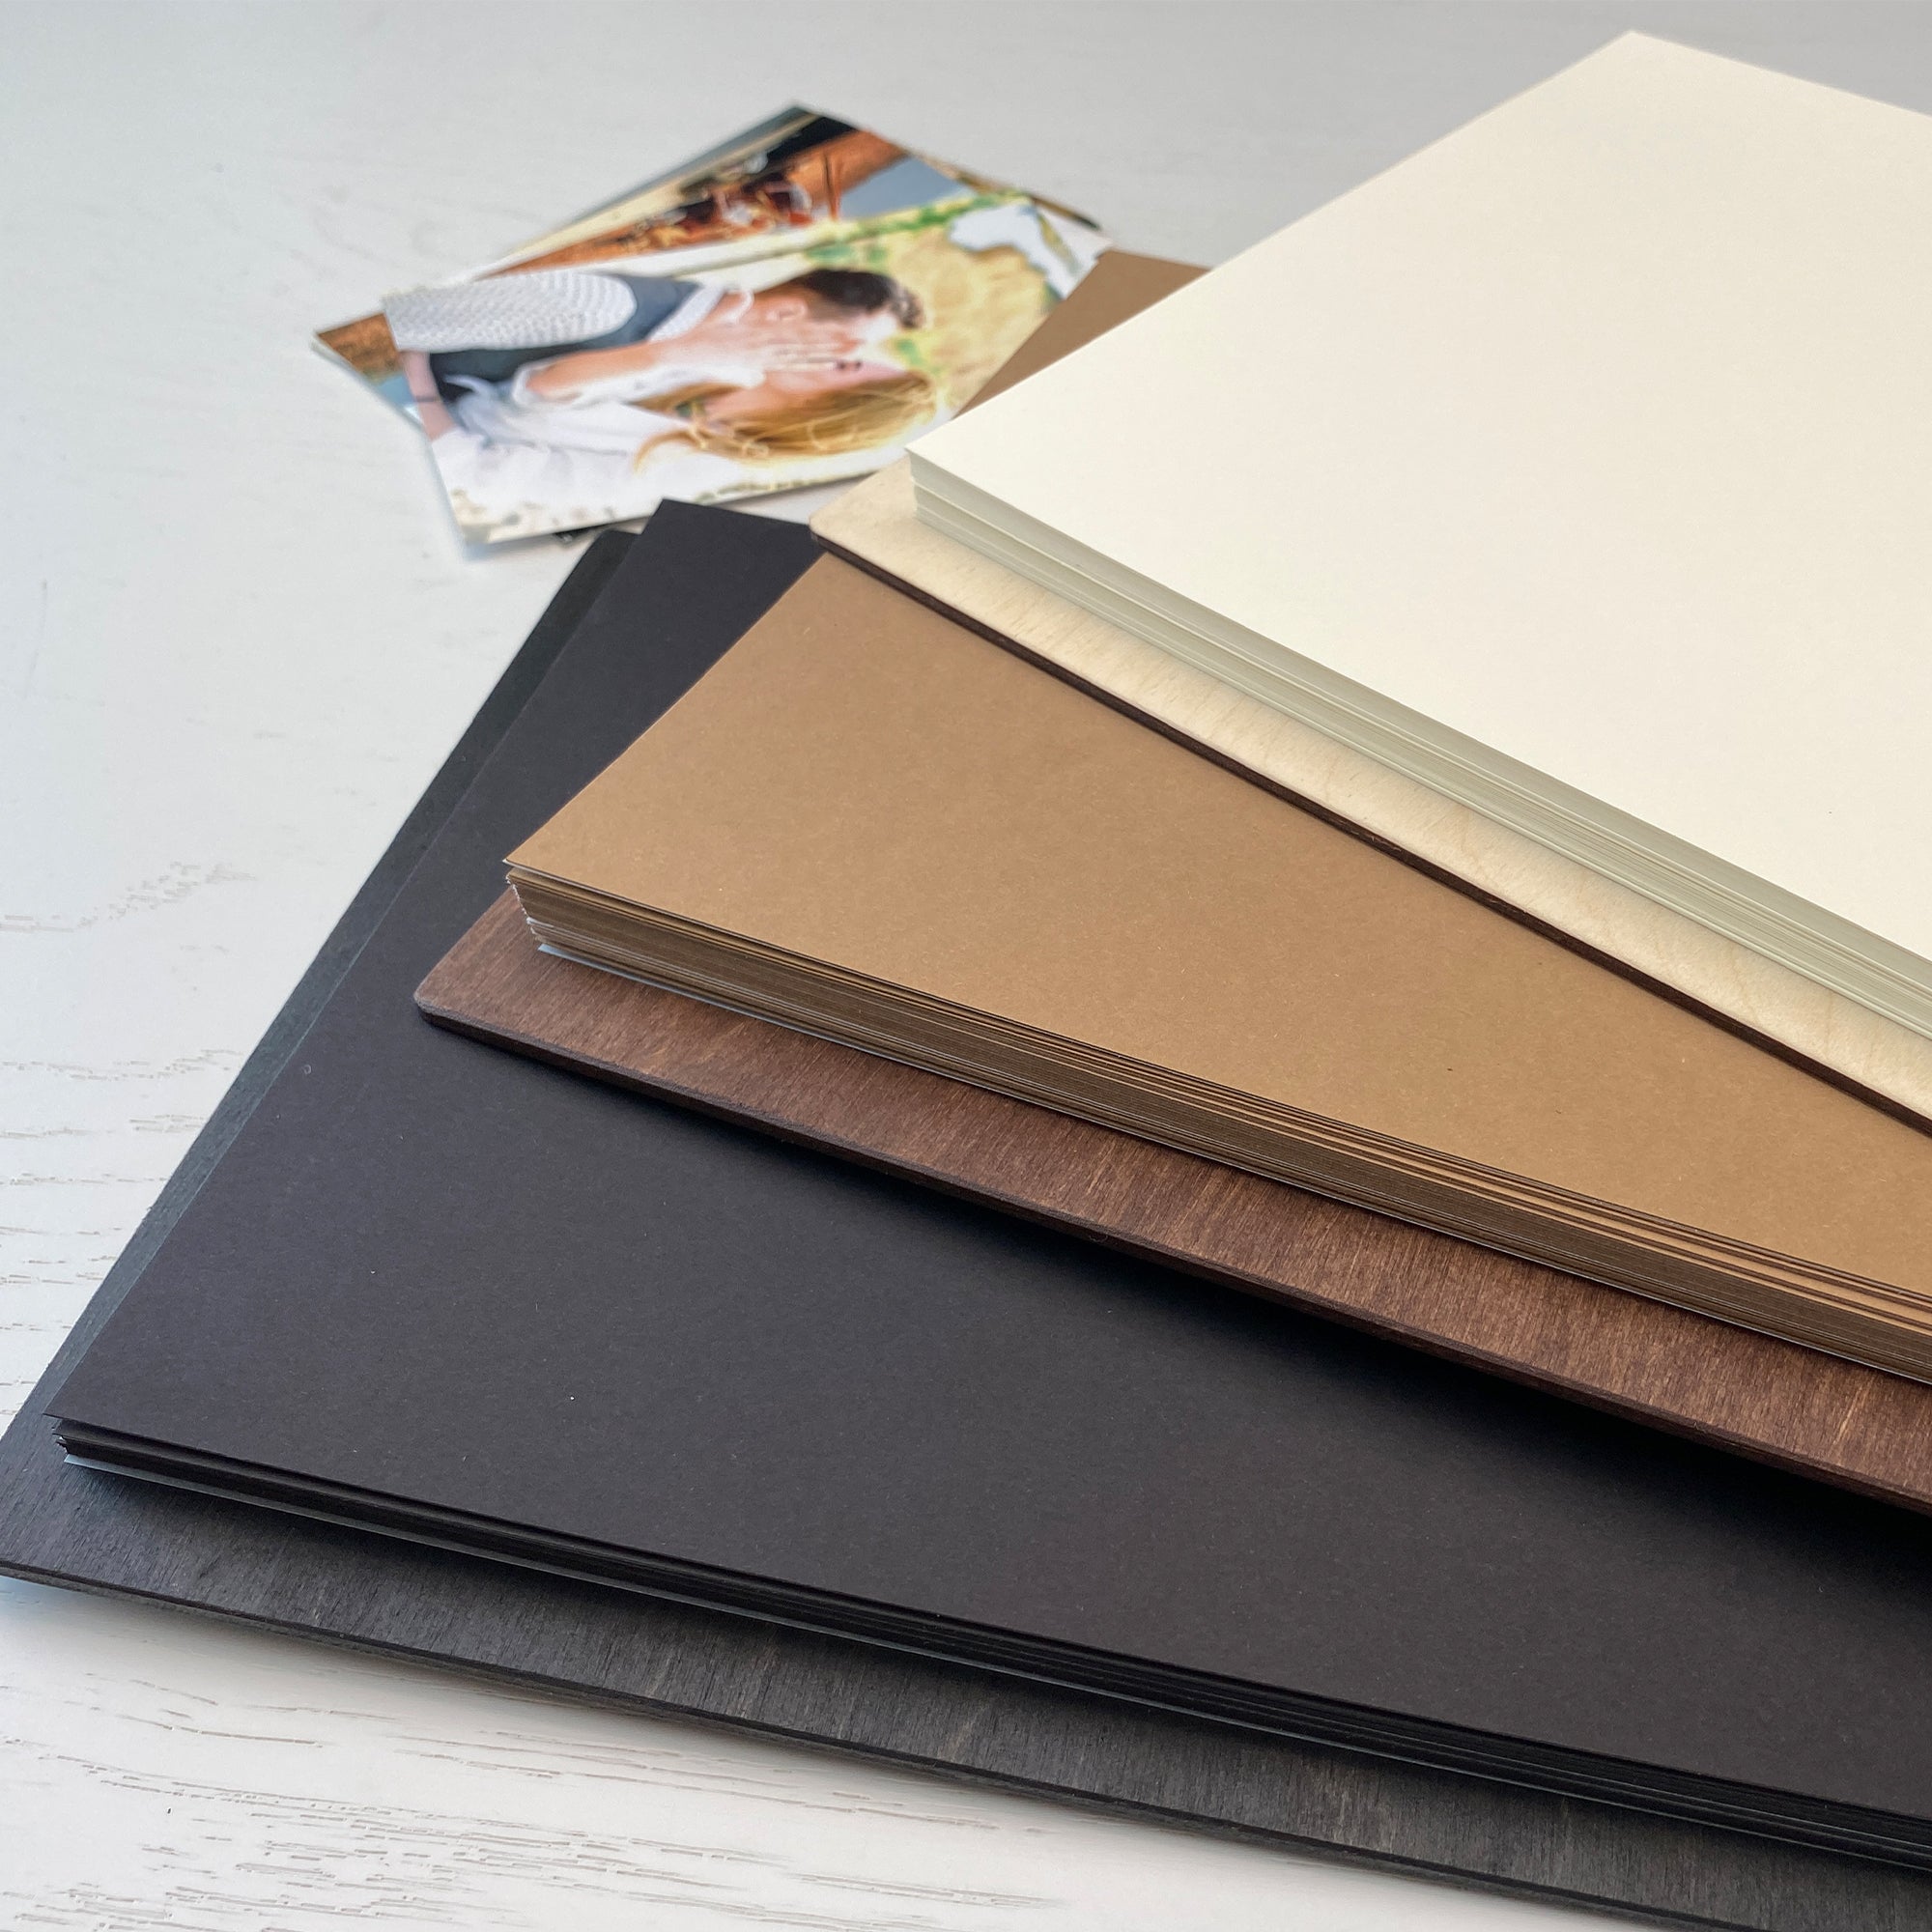 Personalized photo album with leather cover and Love engraving